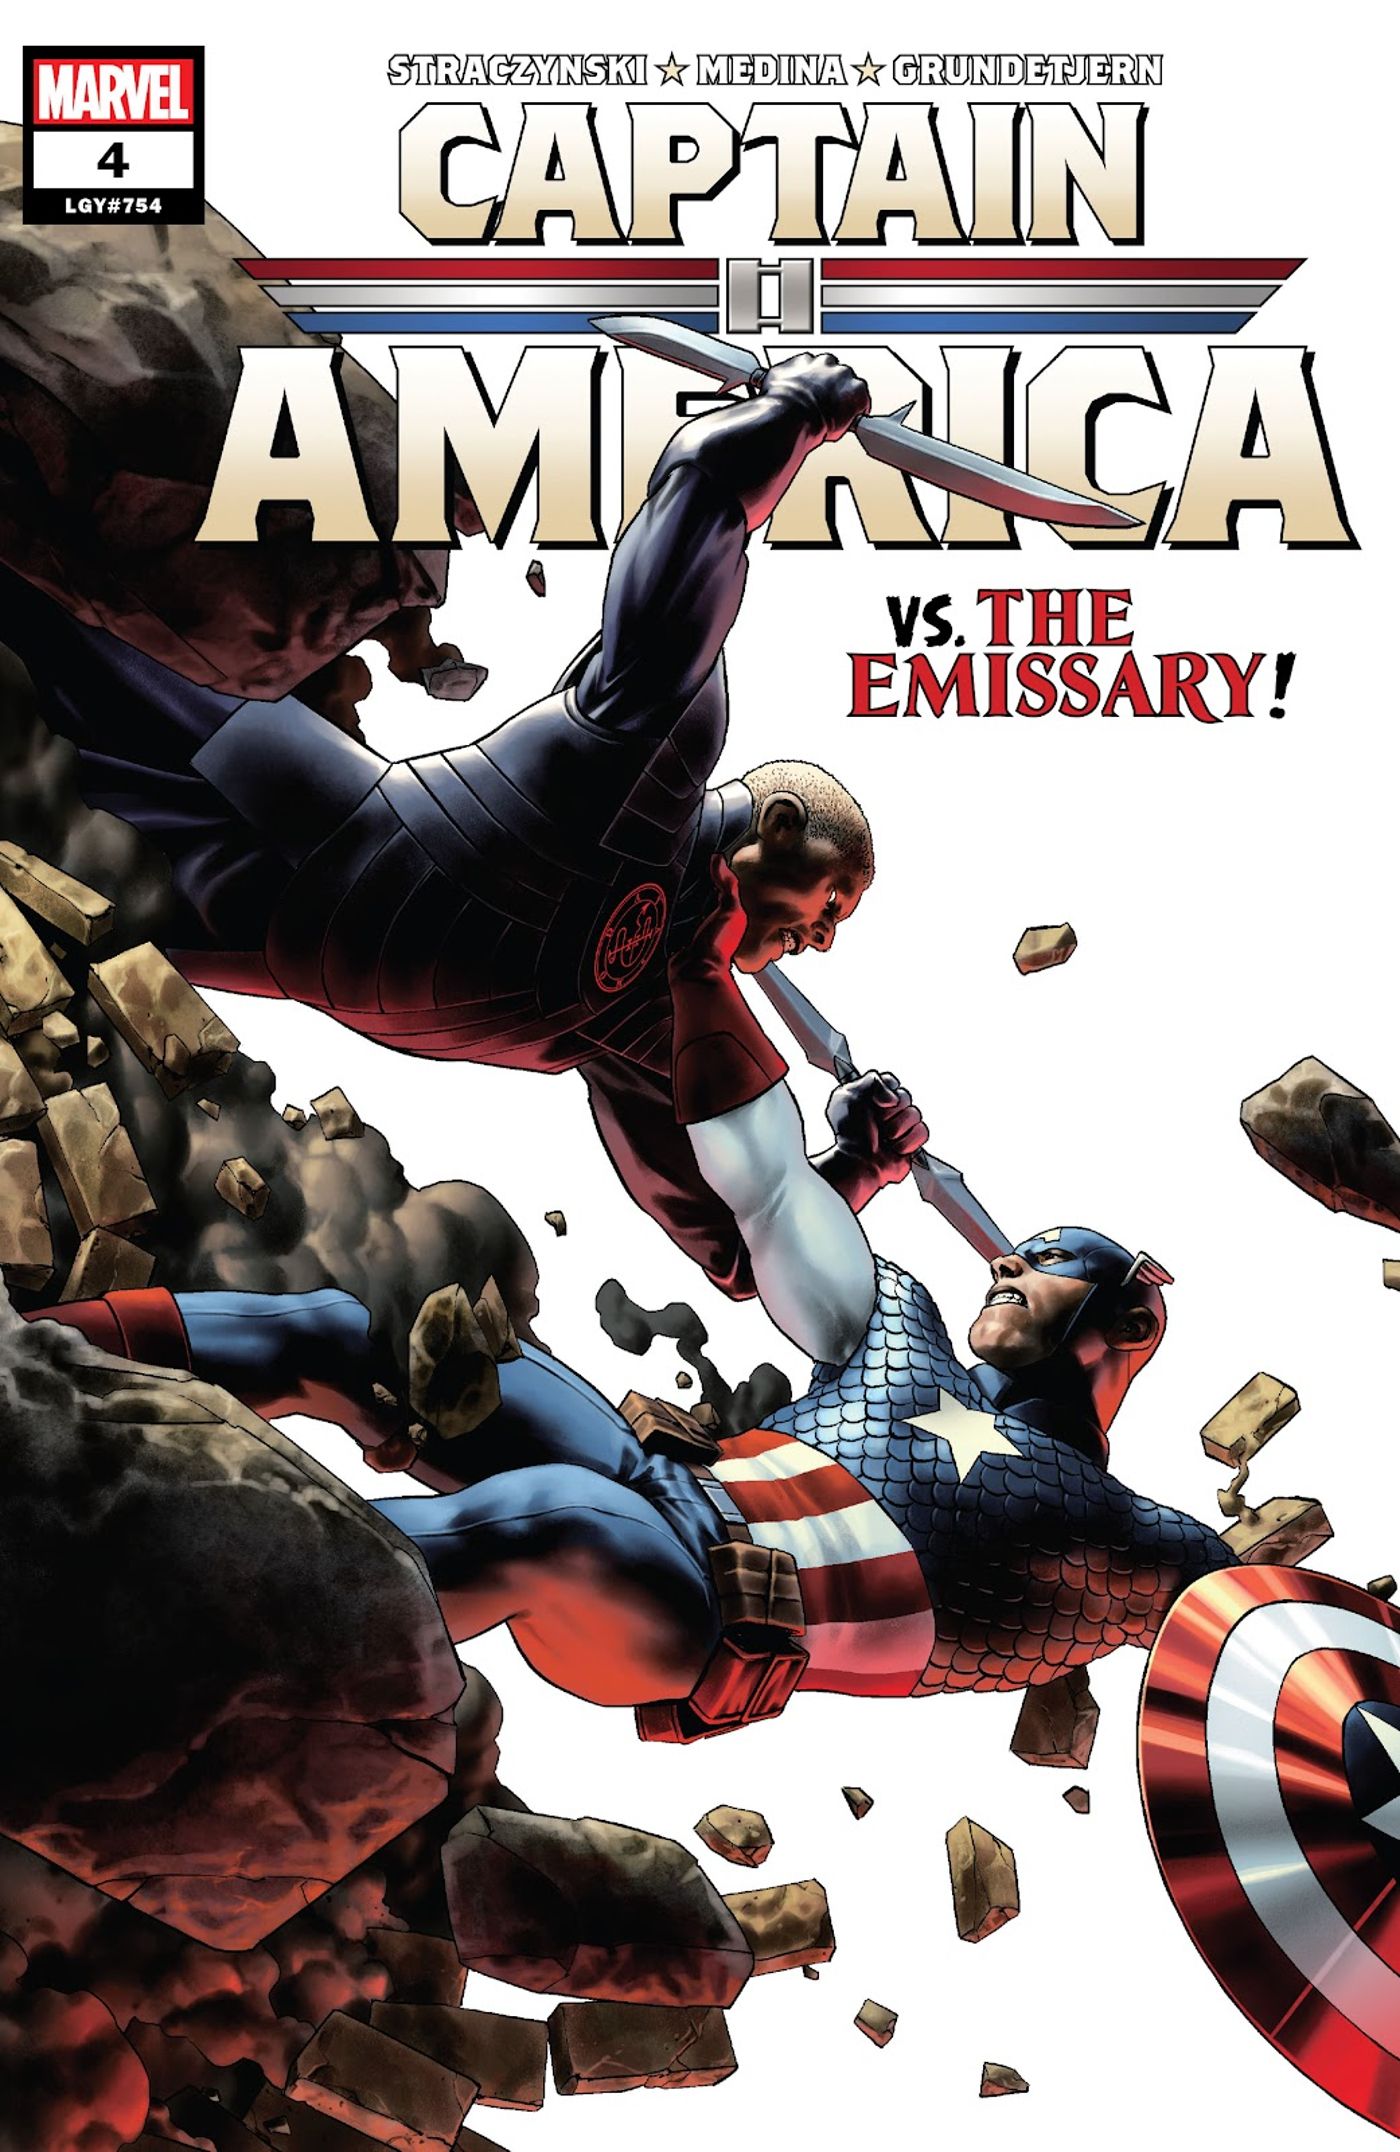 Captain America #4 Cover featuring the Emissary fighting Captain America